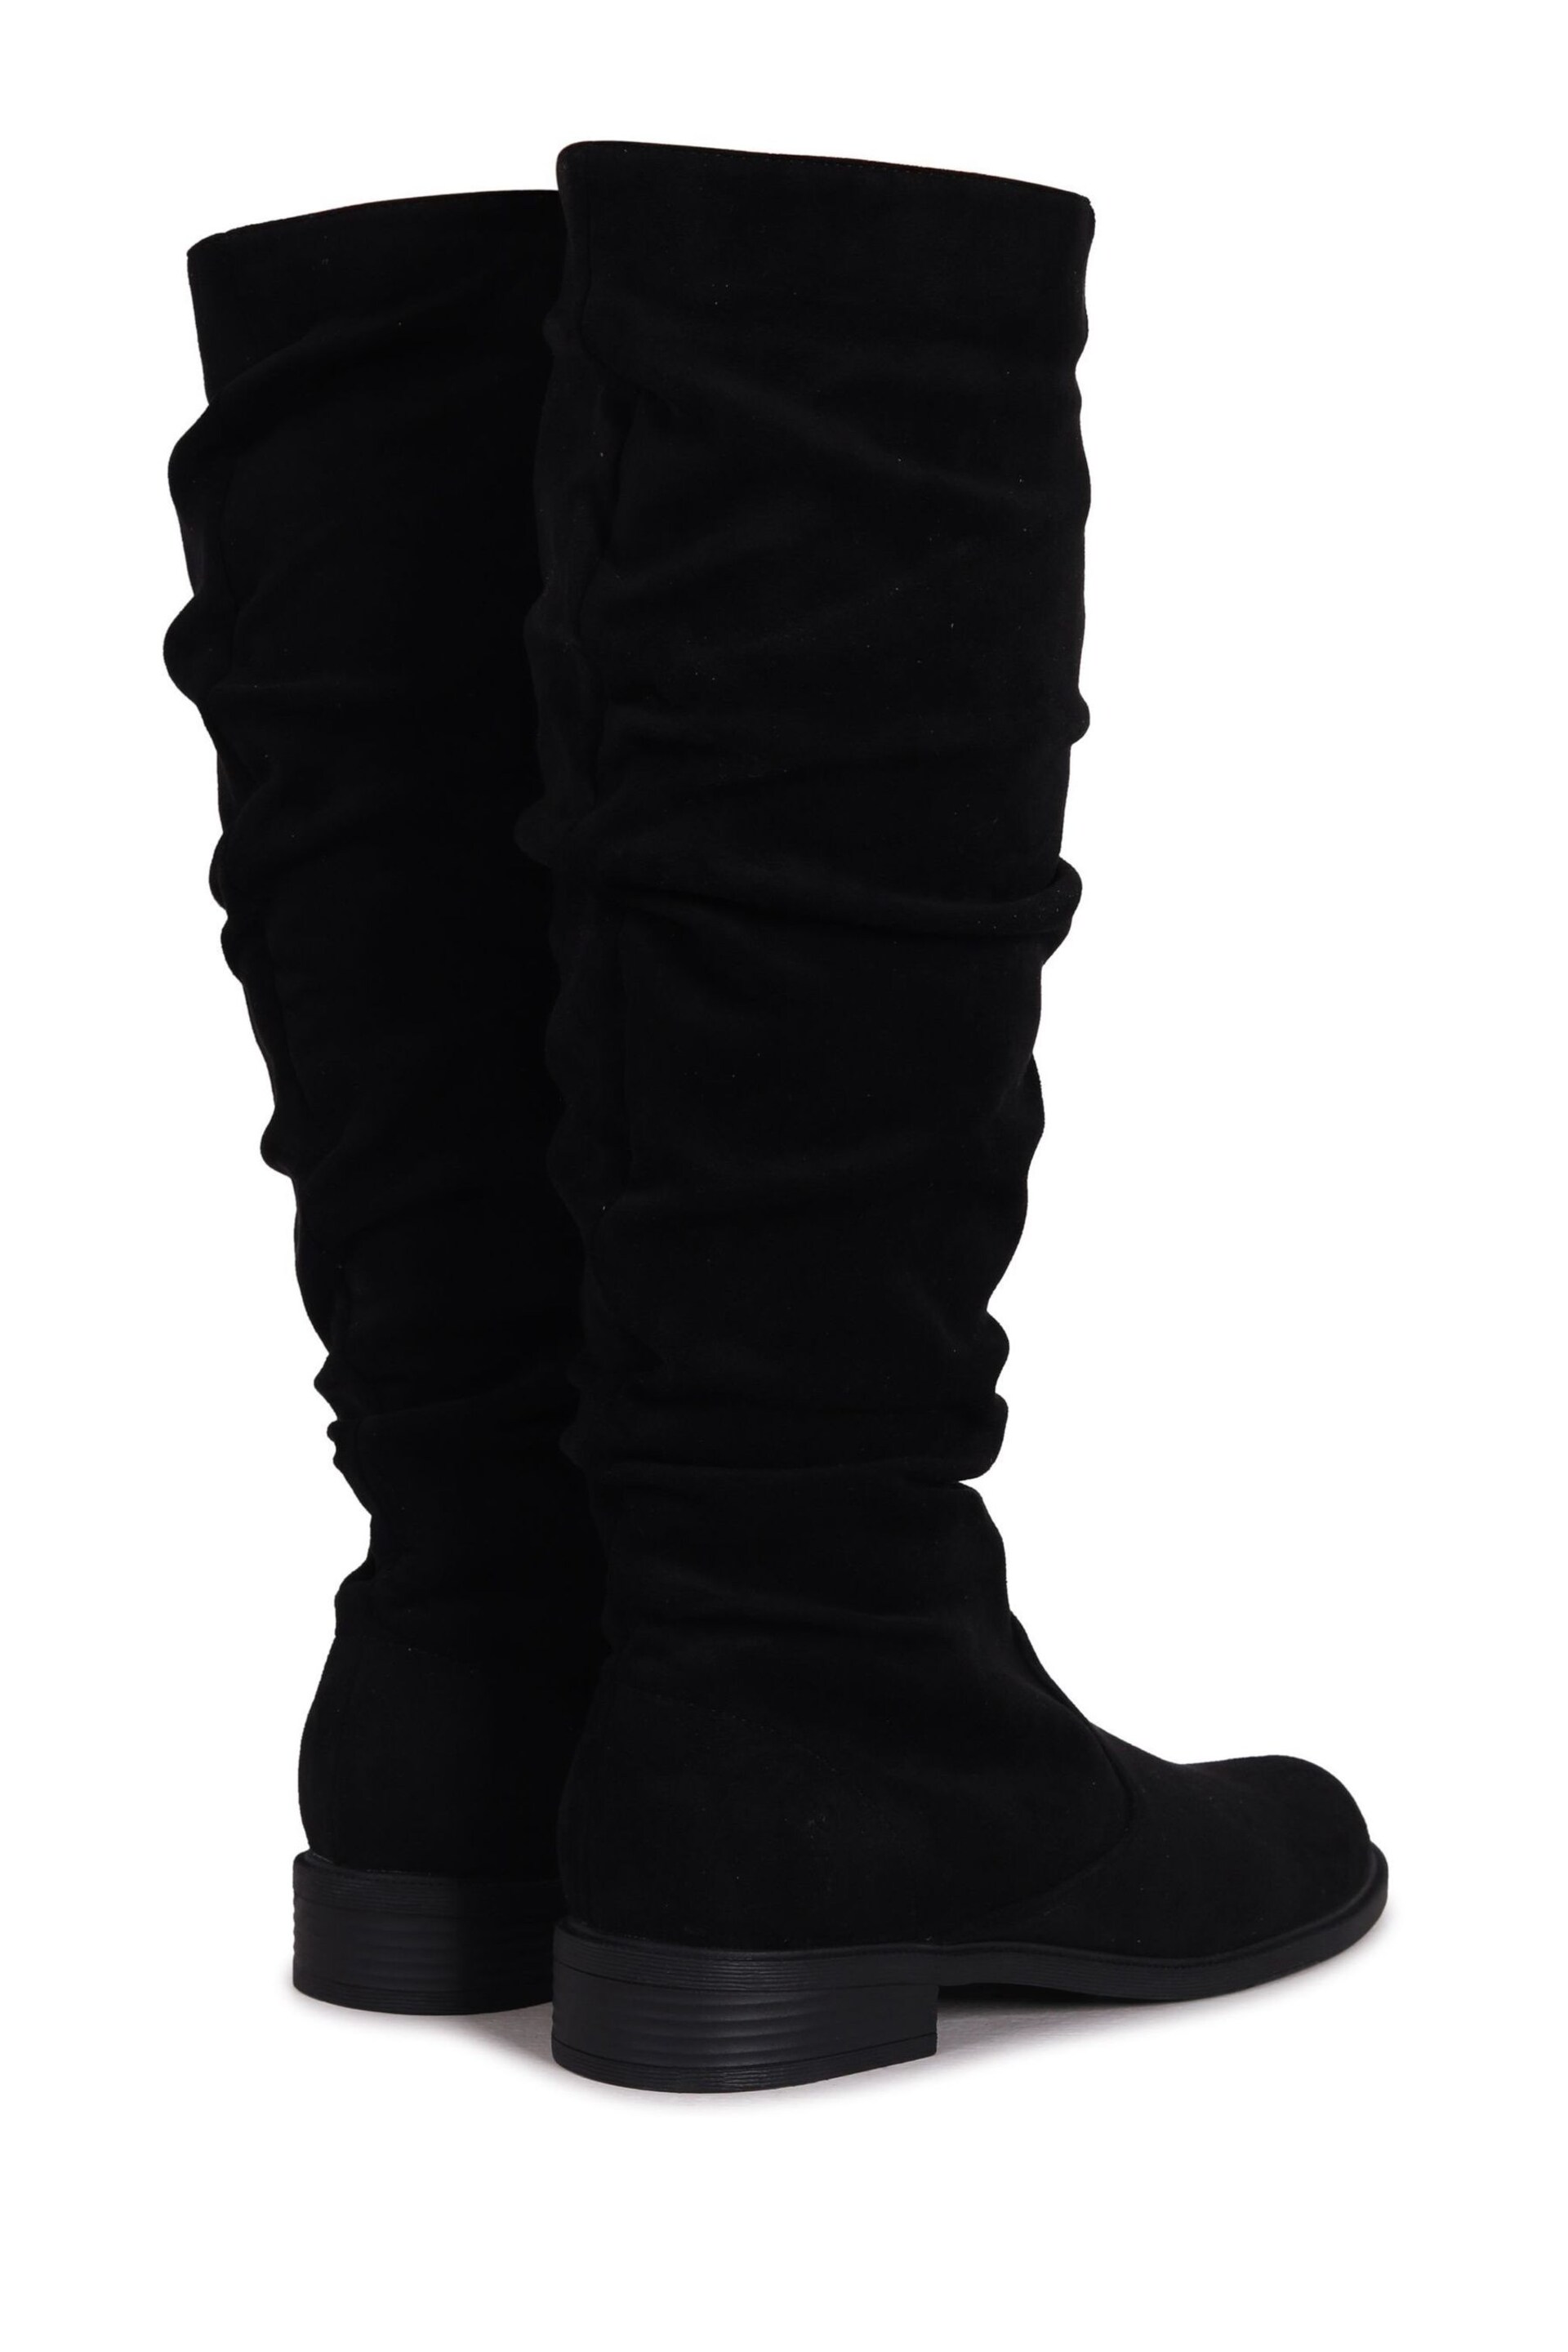 Linzi Black Ciara Faux Suede Flat Ruched Boots - Image 4 of 4